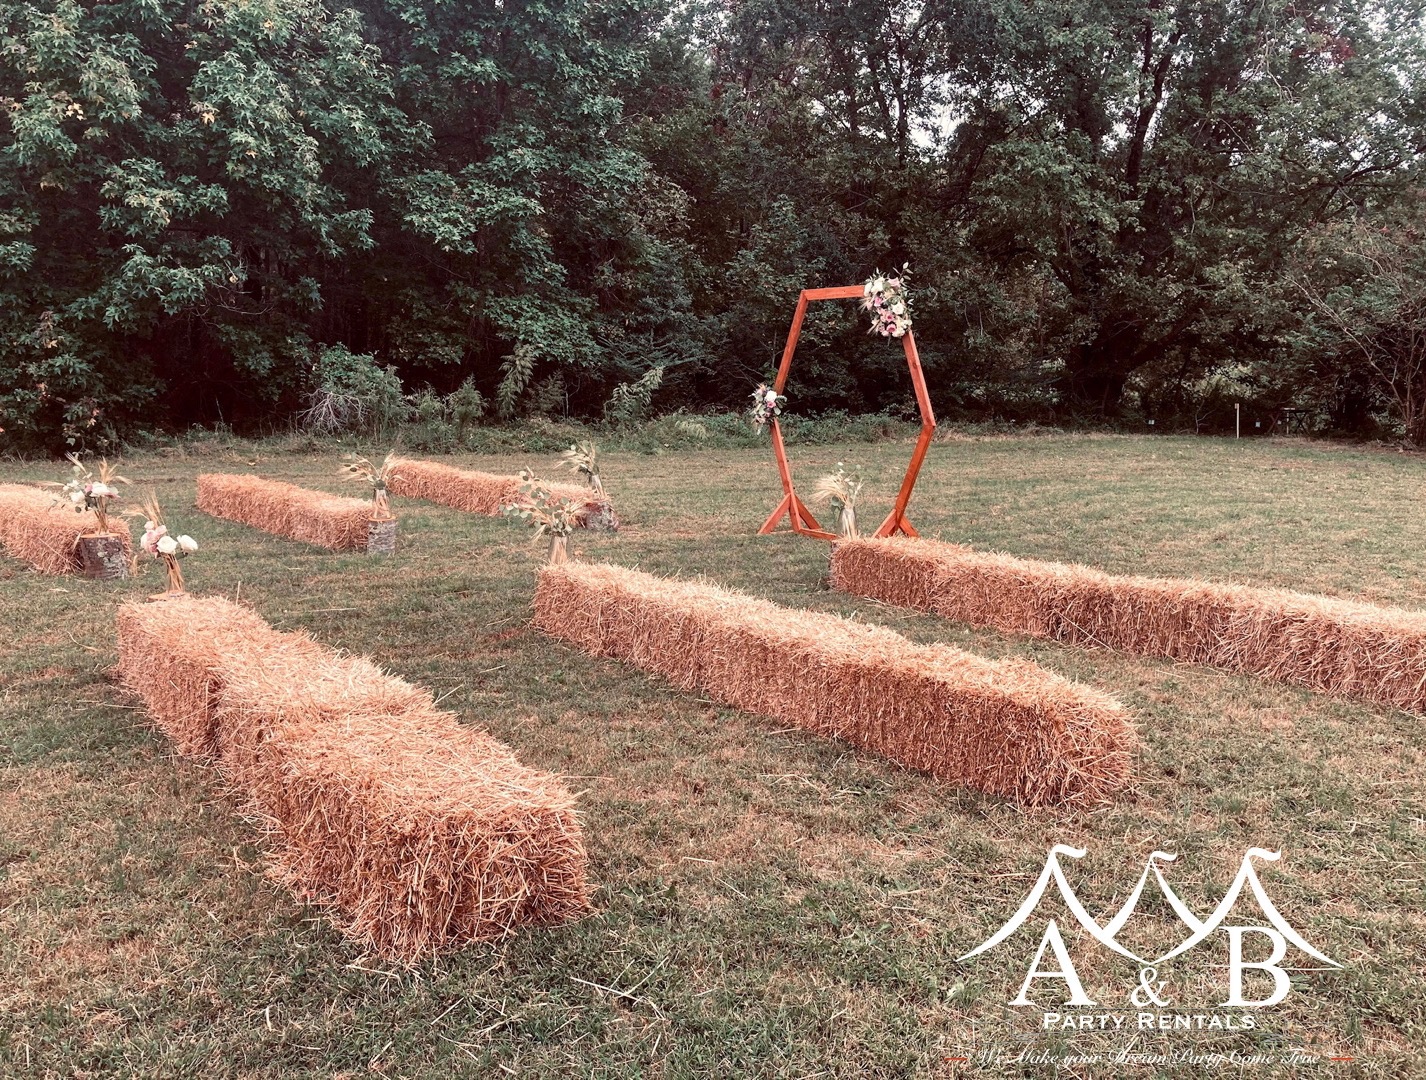 A cedar archway designed for outdoor weddings set between rows of hay stacks. The image showcases a picturesque outdoor wedding setting with a cedar archway positioned between rows of hay stacks, providing a rustic and charming backdrop for ceremonies. Available through A&B Party Rentals in Salisbury, MD.